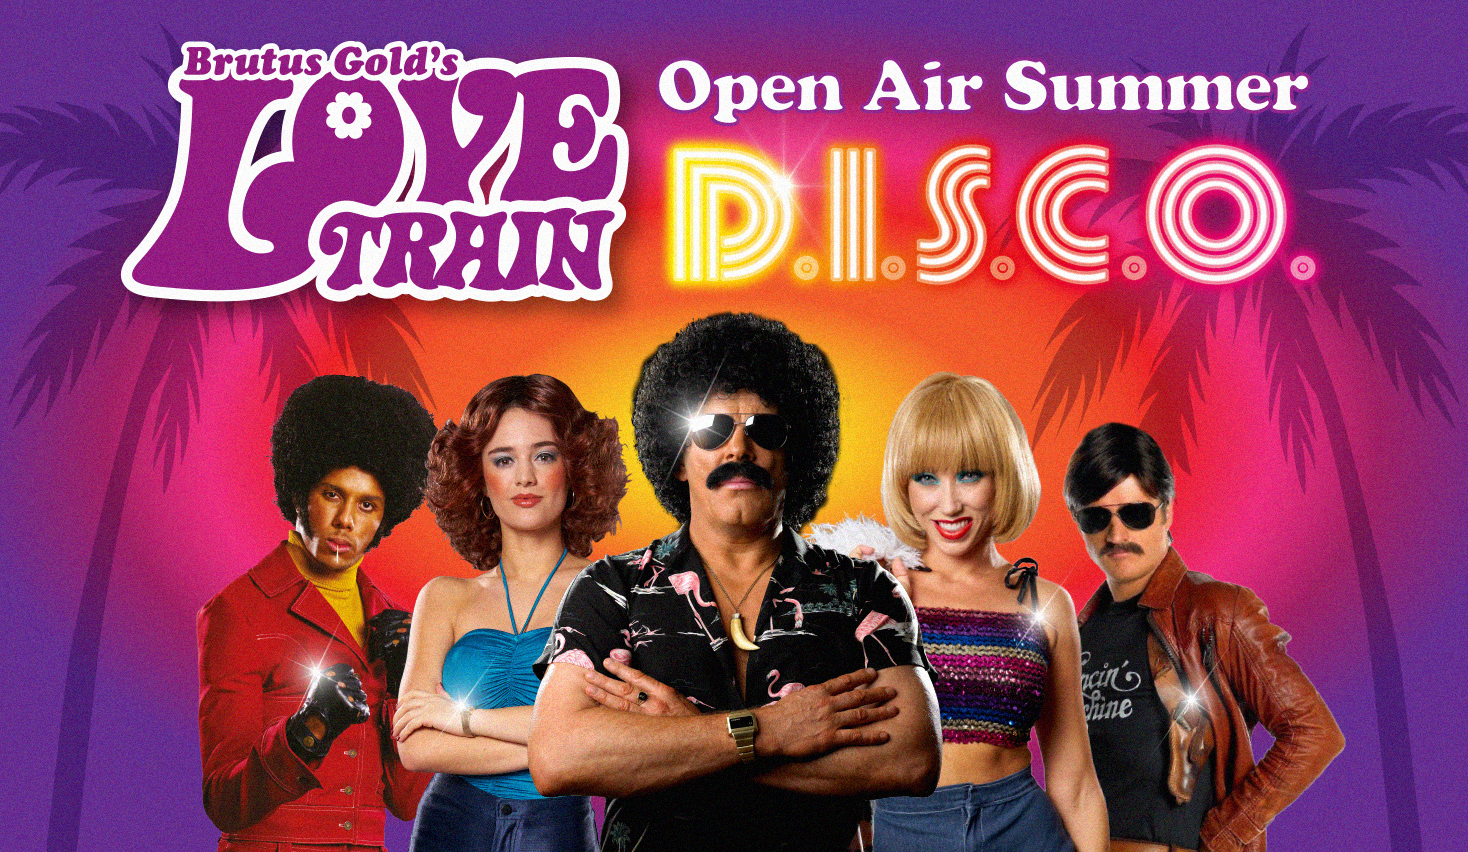 Brutus Gold’s Love Train – Open Air Summer Disco Party